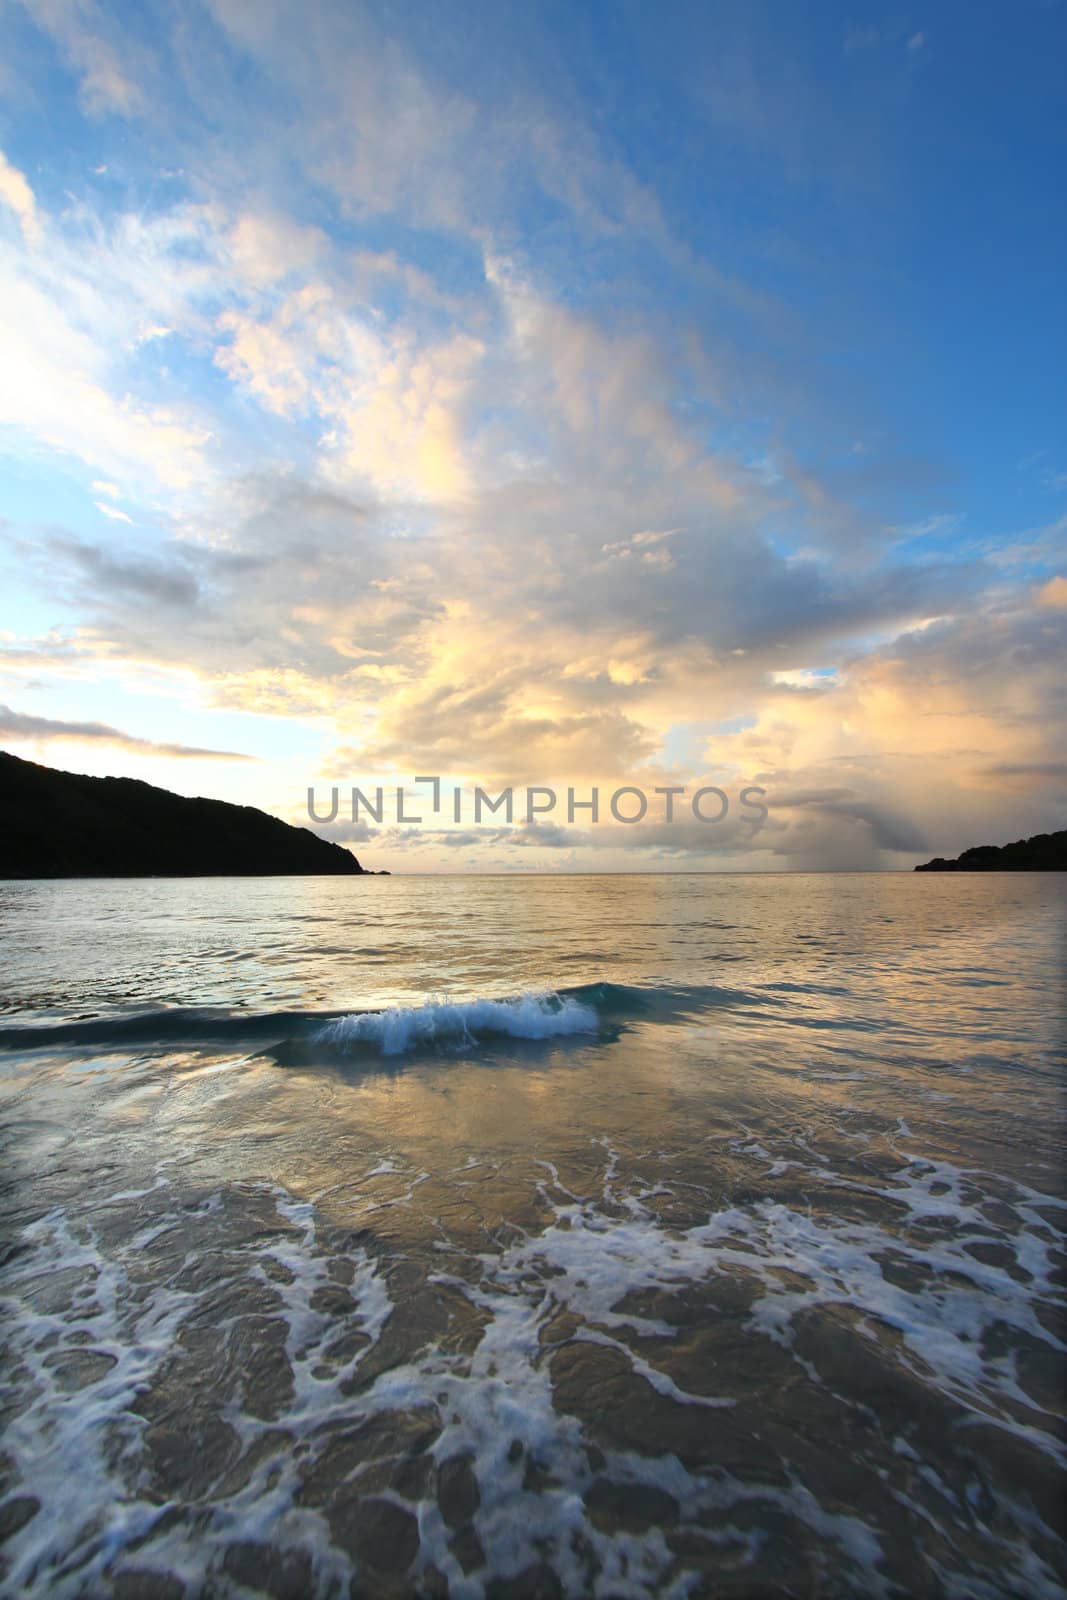 Brewers Bay of Tortola - BVI by Wirepec